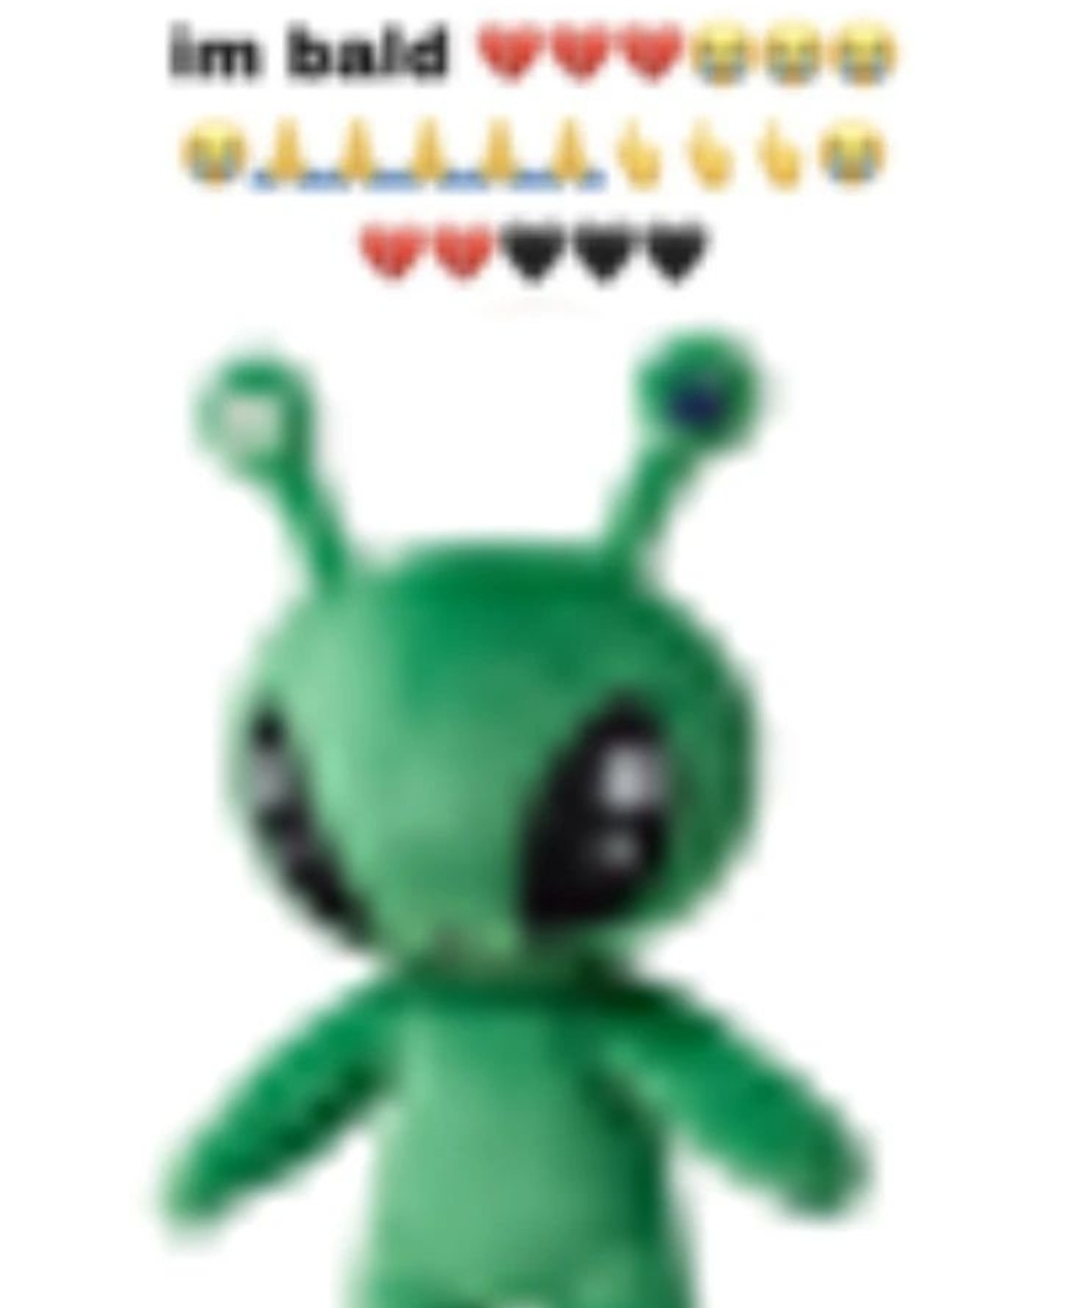 low quality image of an alien ikea plush with the text 'IM BALD!!!!'